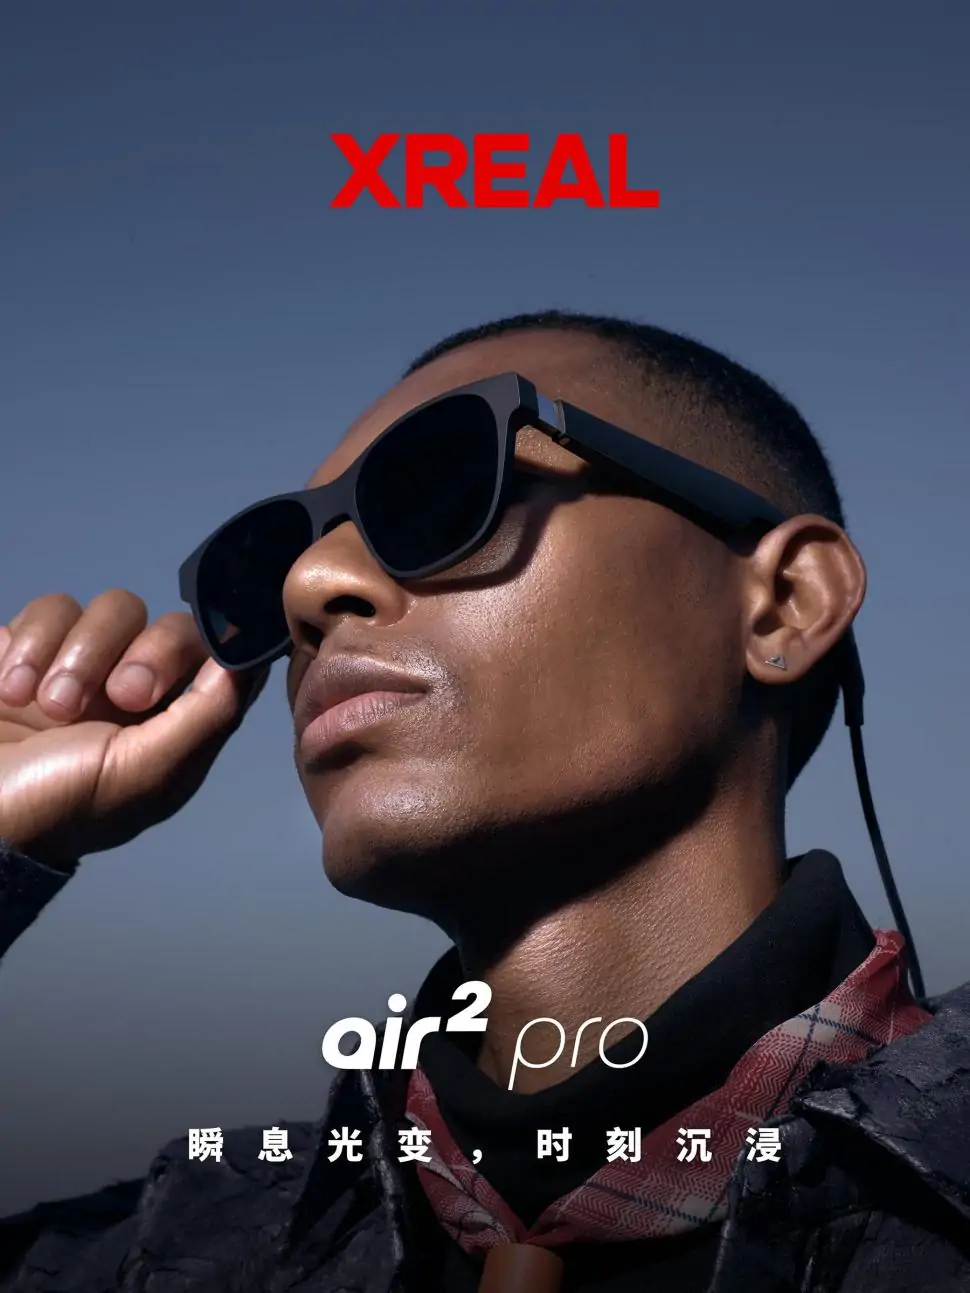 Xreal unveils next-generation AR headsets featuring major